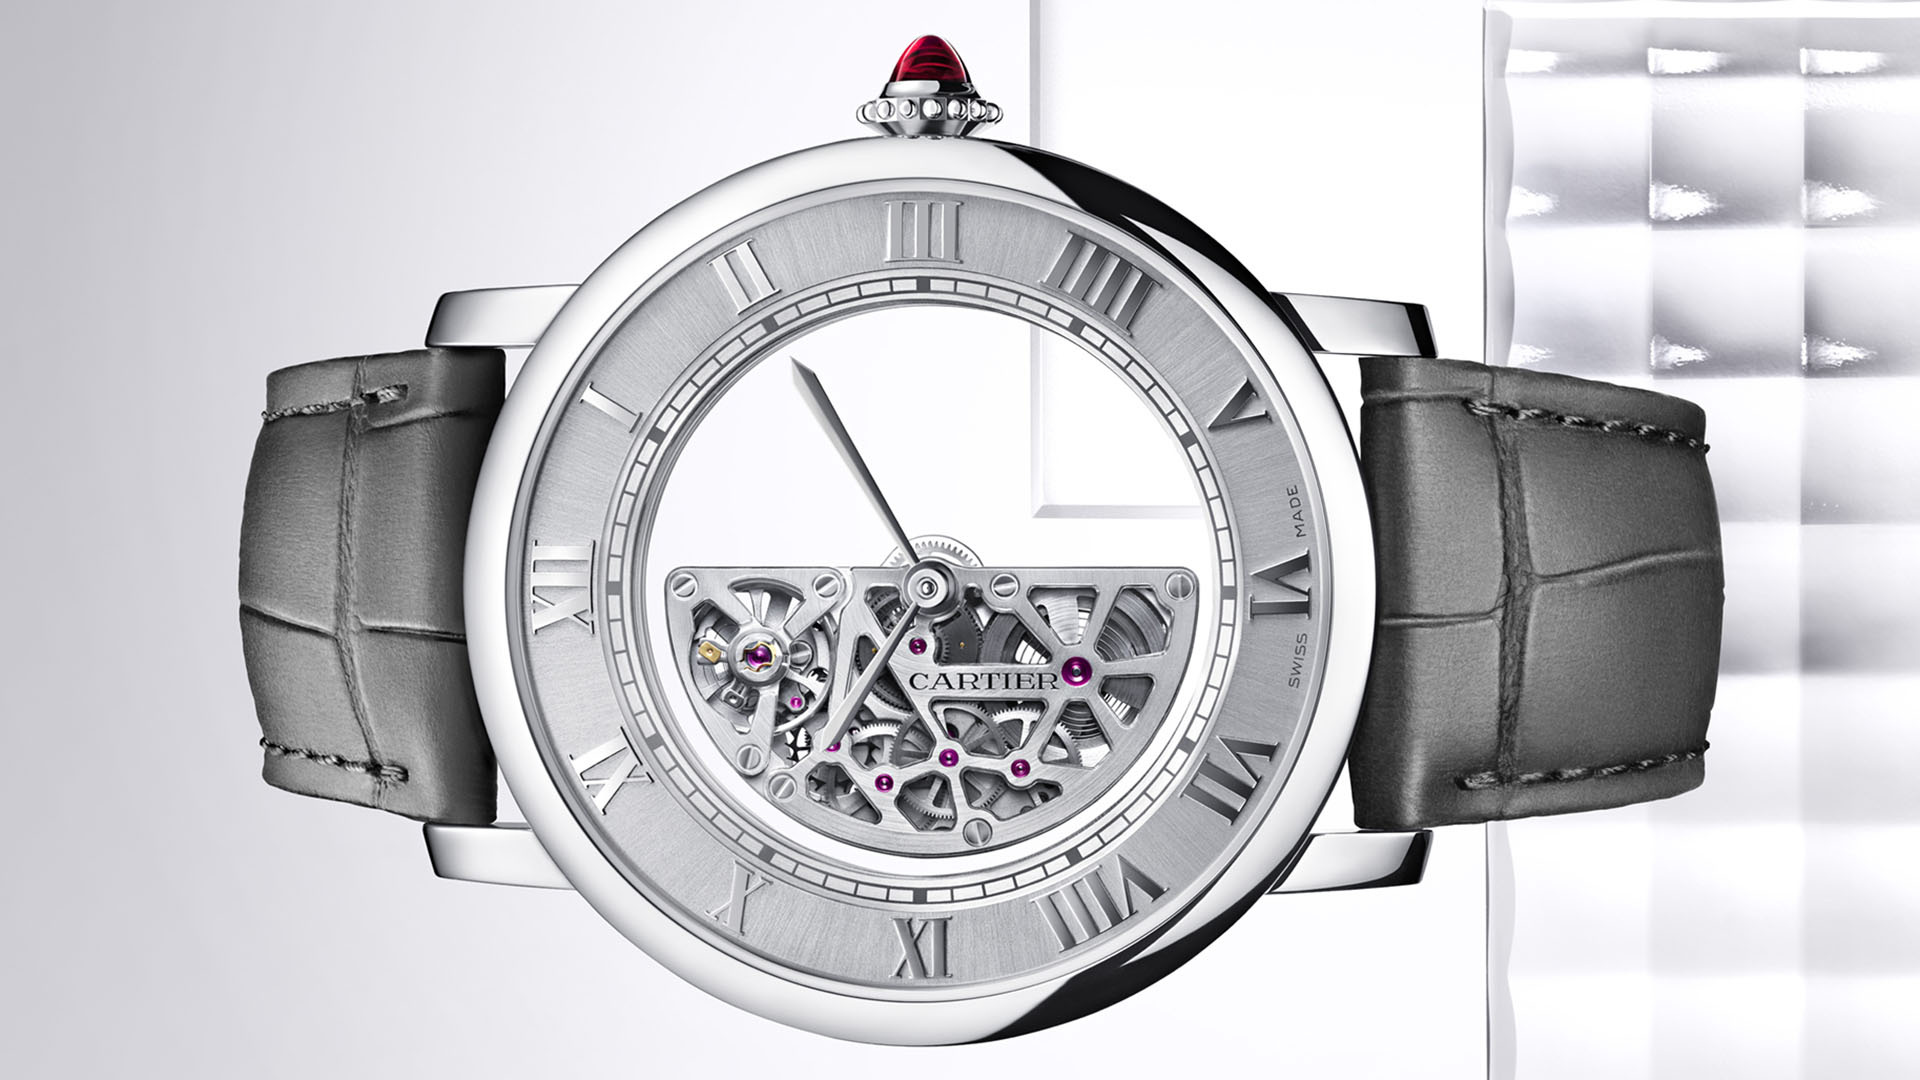 Cartier limited edition, Masse mystrieuse watch, Unique winding rotor, 1920x1080 Full HD Desktop